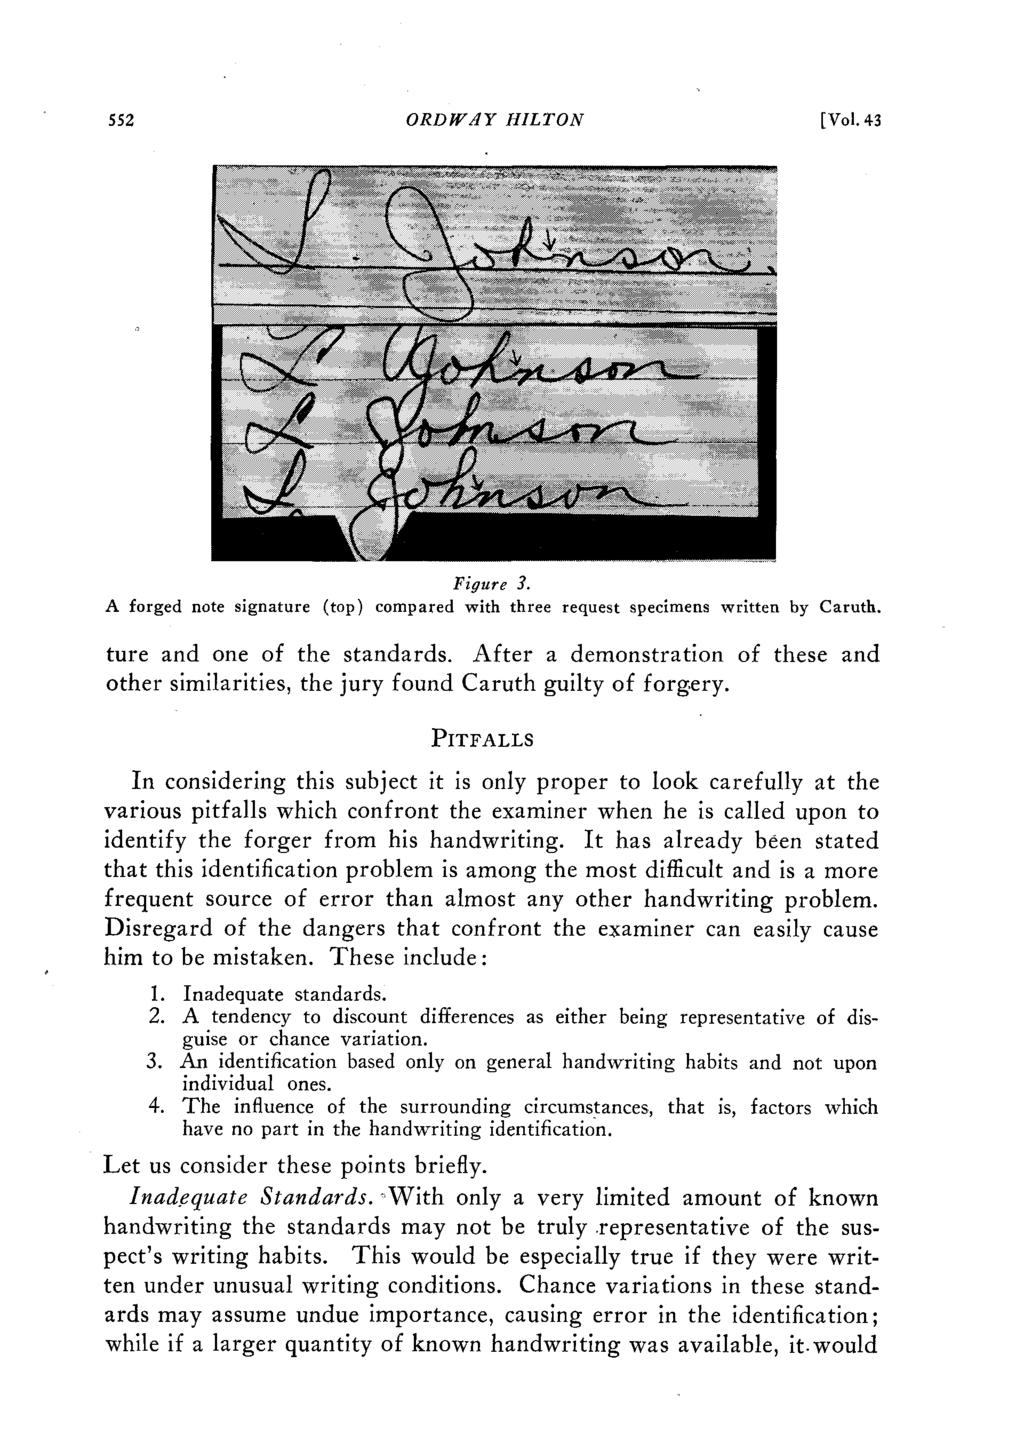 ORD WJY HILTON [Vol. 43 Figure 3. A forged note signature (top) compared with three request specimens written by Caruth. ture and one of the standards.